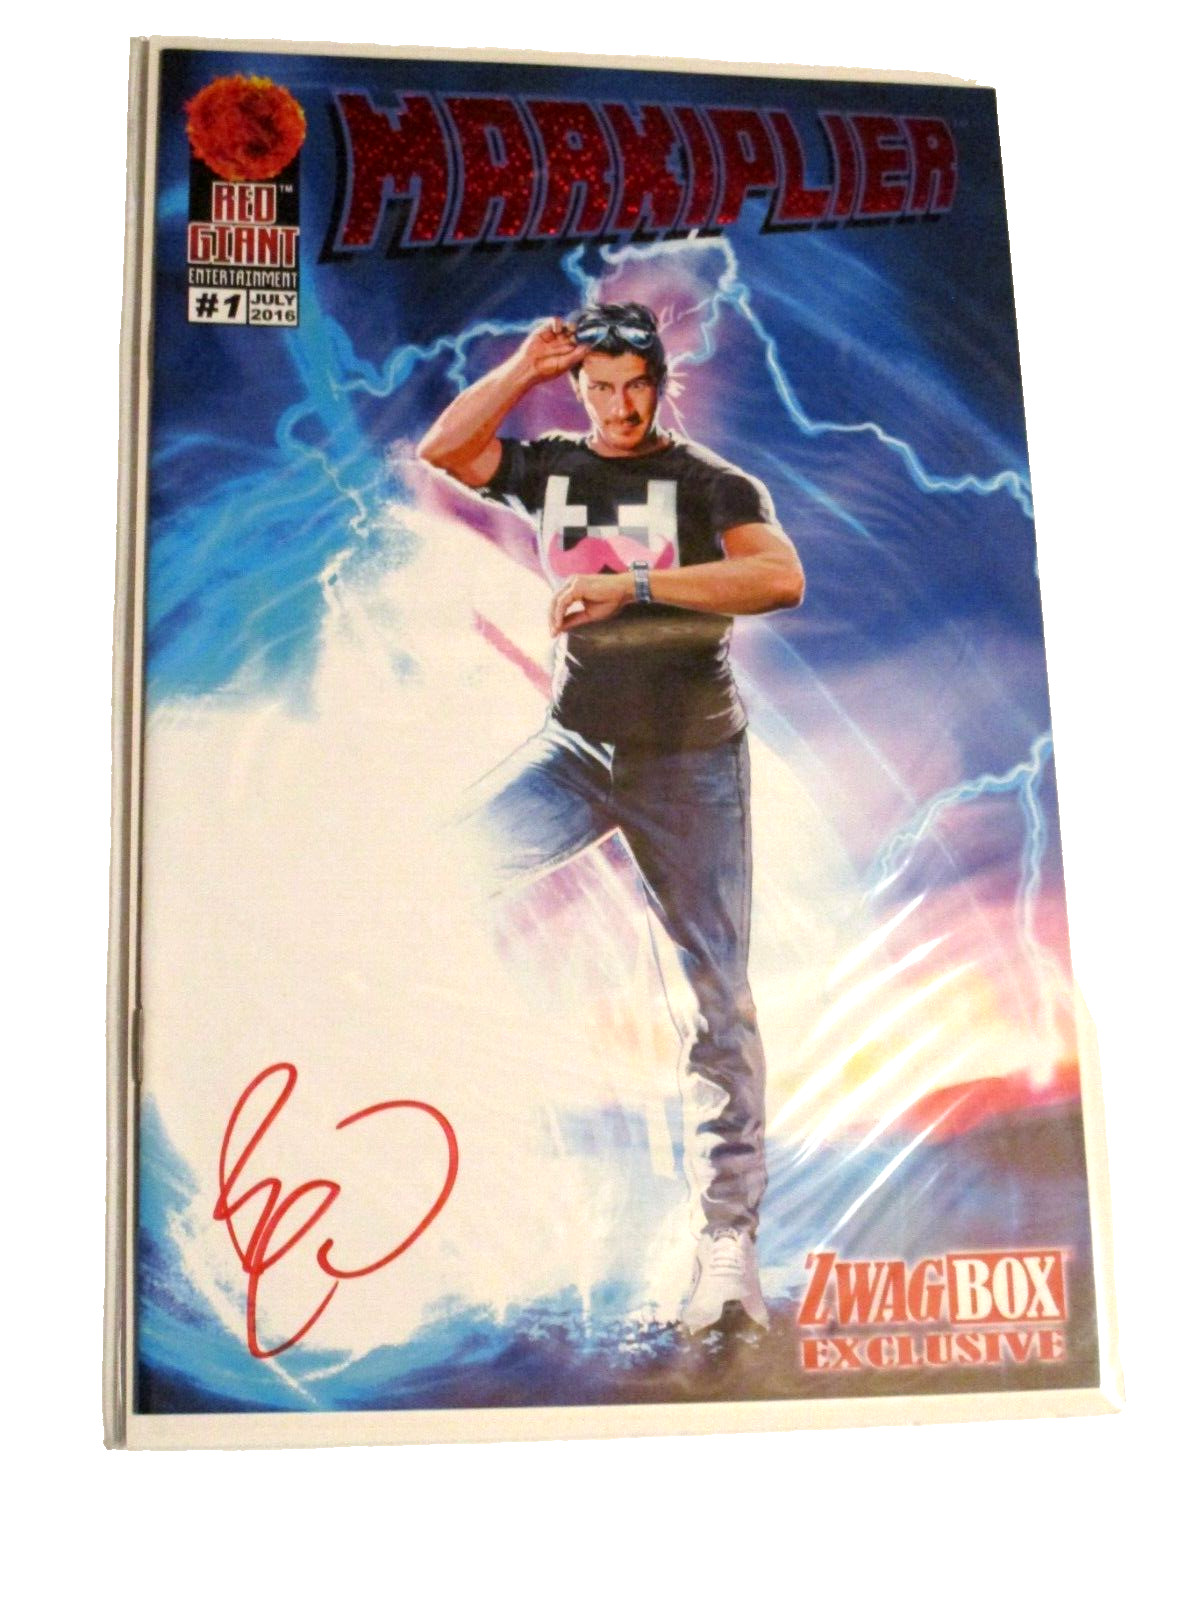 MARKIPLIER BACK FUTURE #1 COVER SIGNED SS BENNY POWELL ABSOLUTE W/COA E97